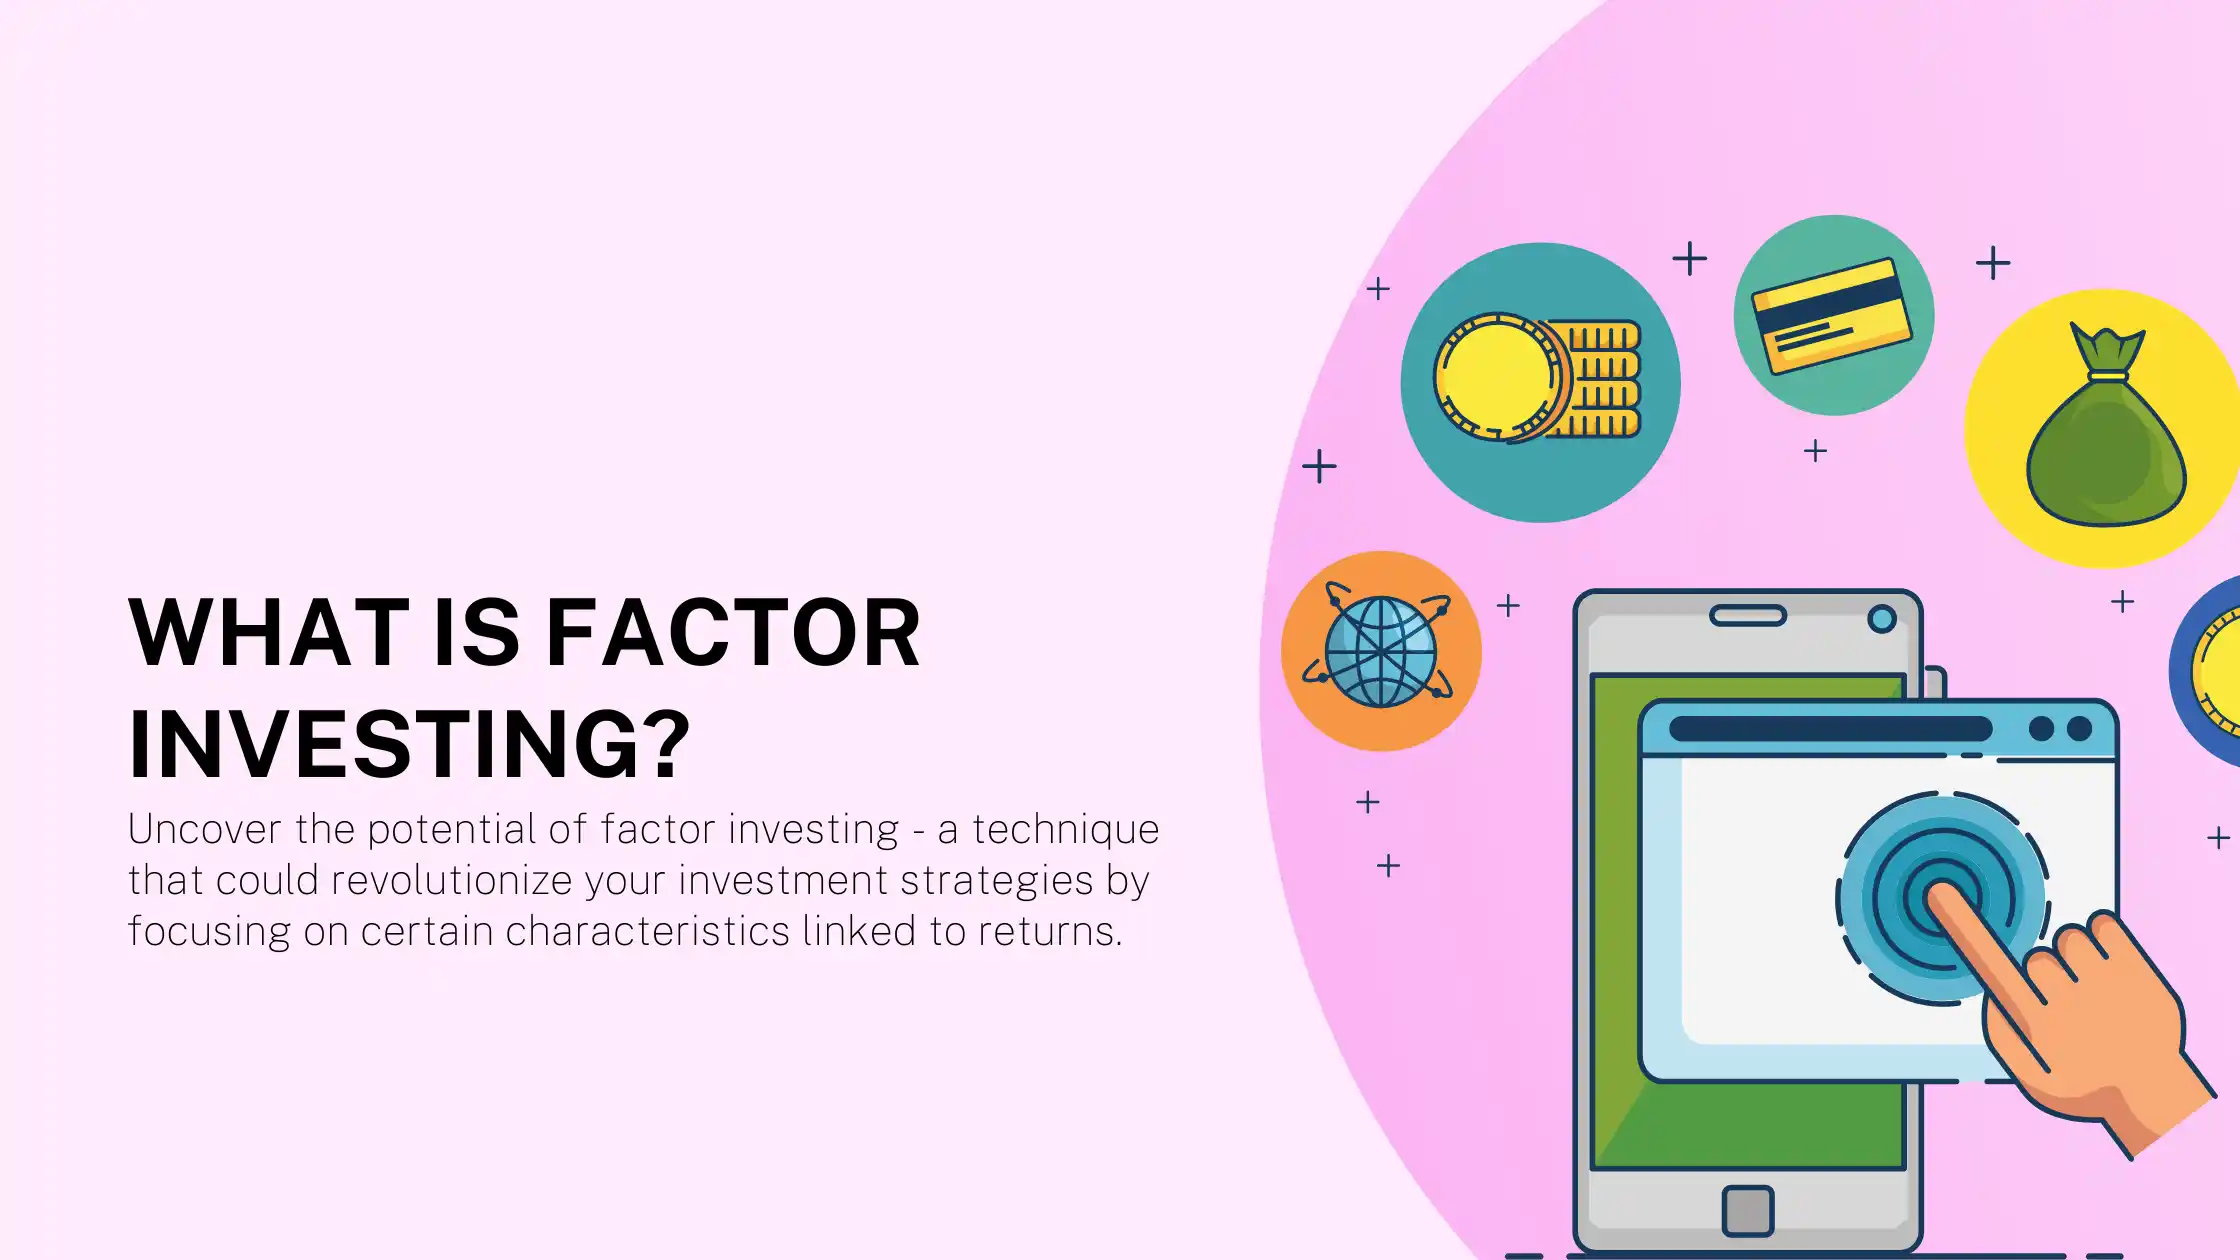 What is Factor Investing?